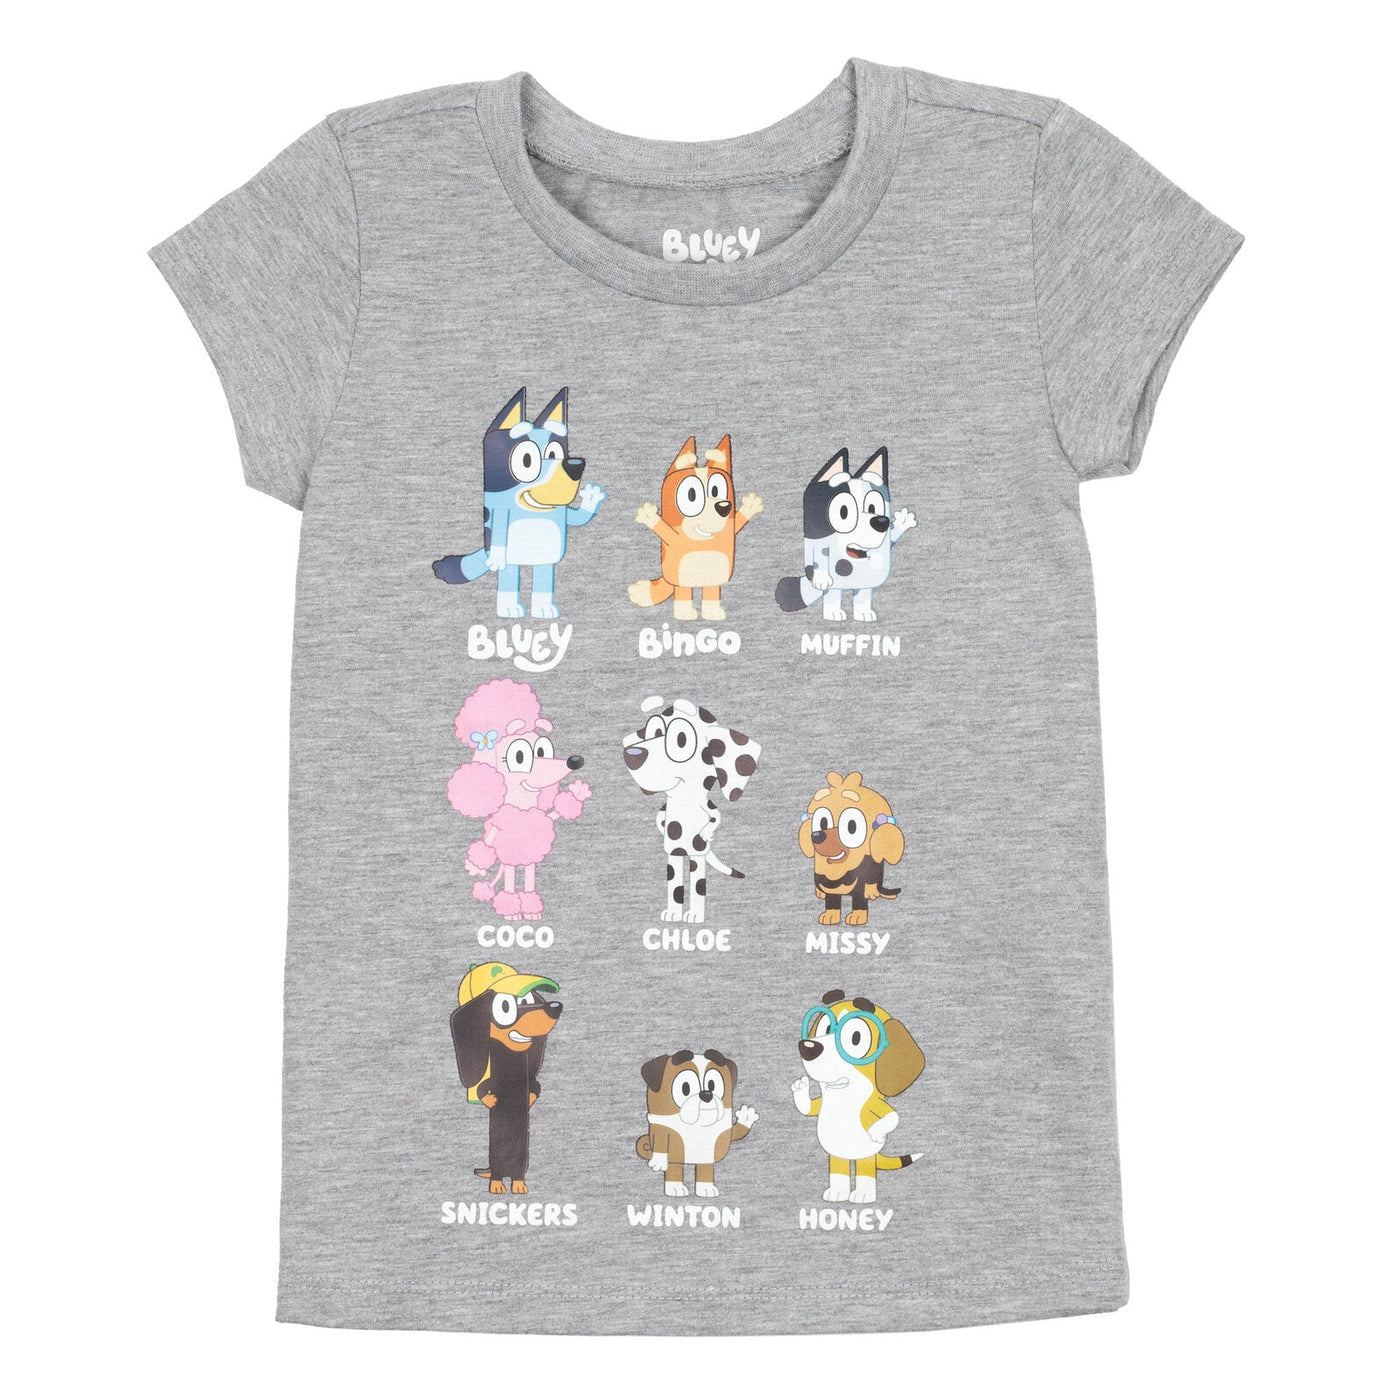 Bluey Bingo and Friends Little Girls 3 Pack Graphic T-shirts Blue / Grey / Pink 6-6X